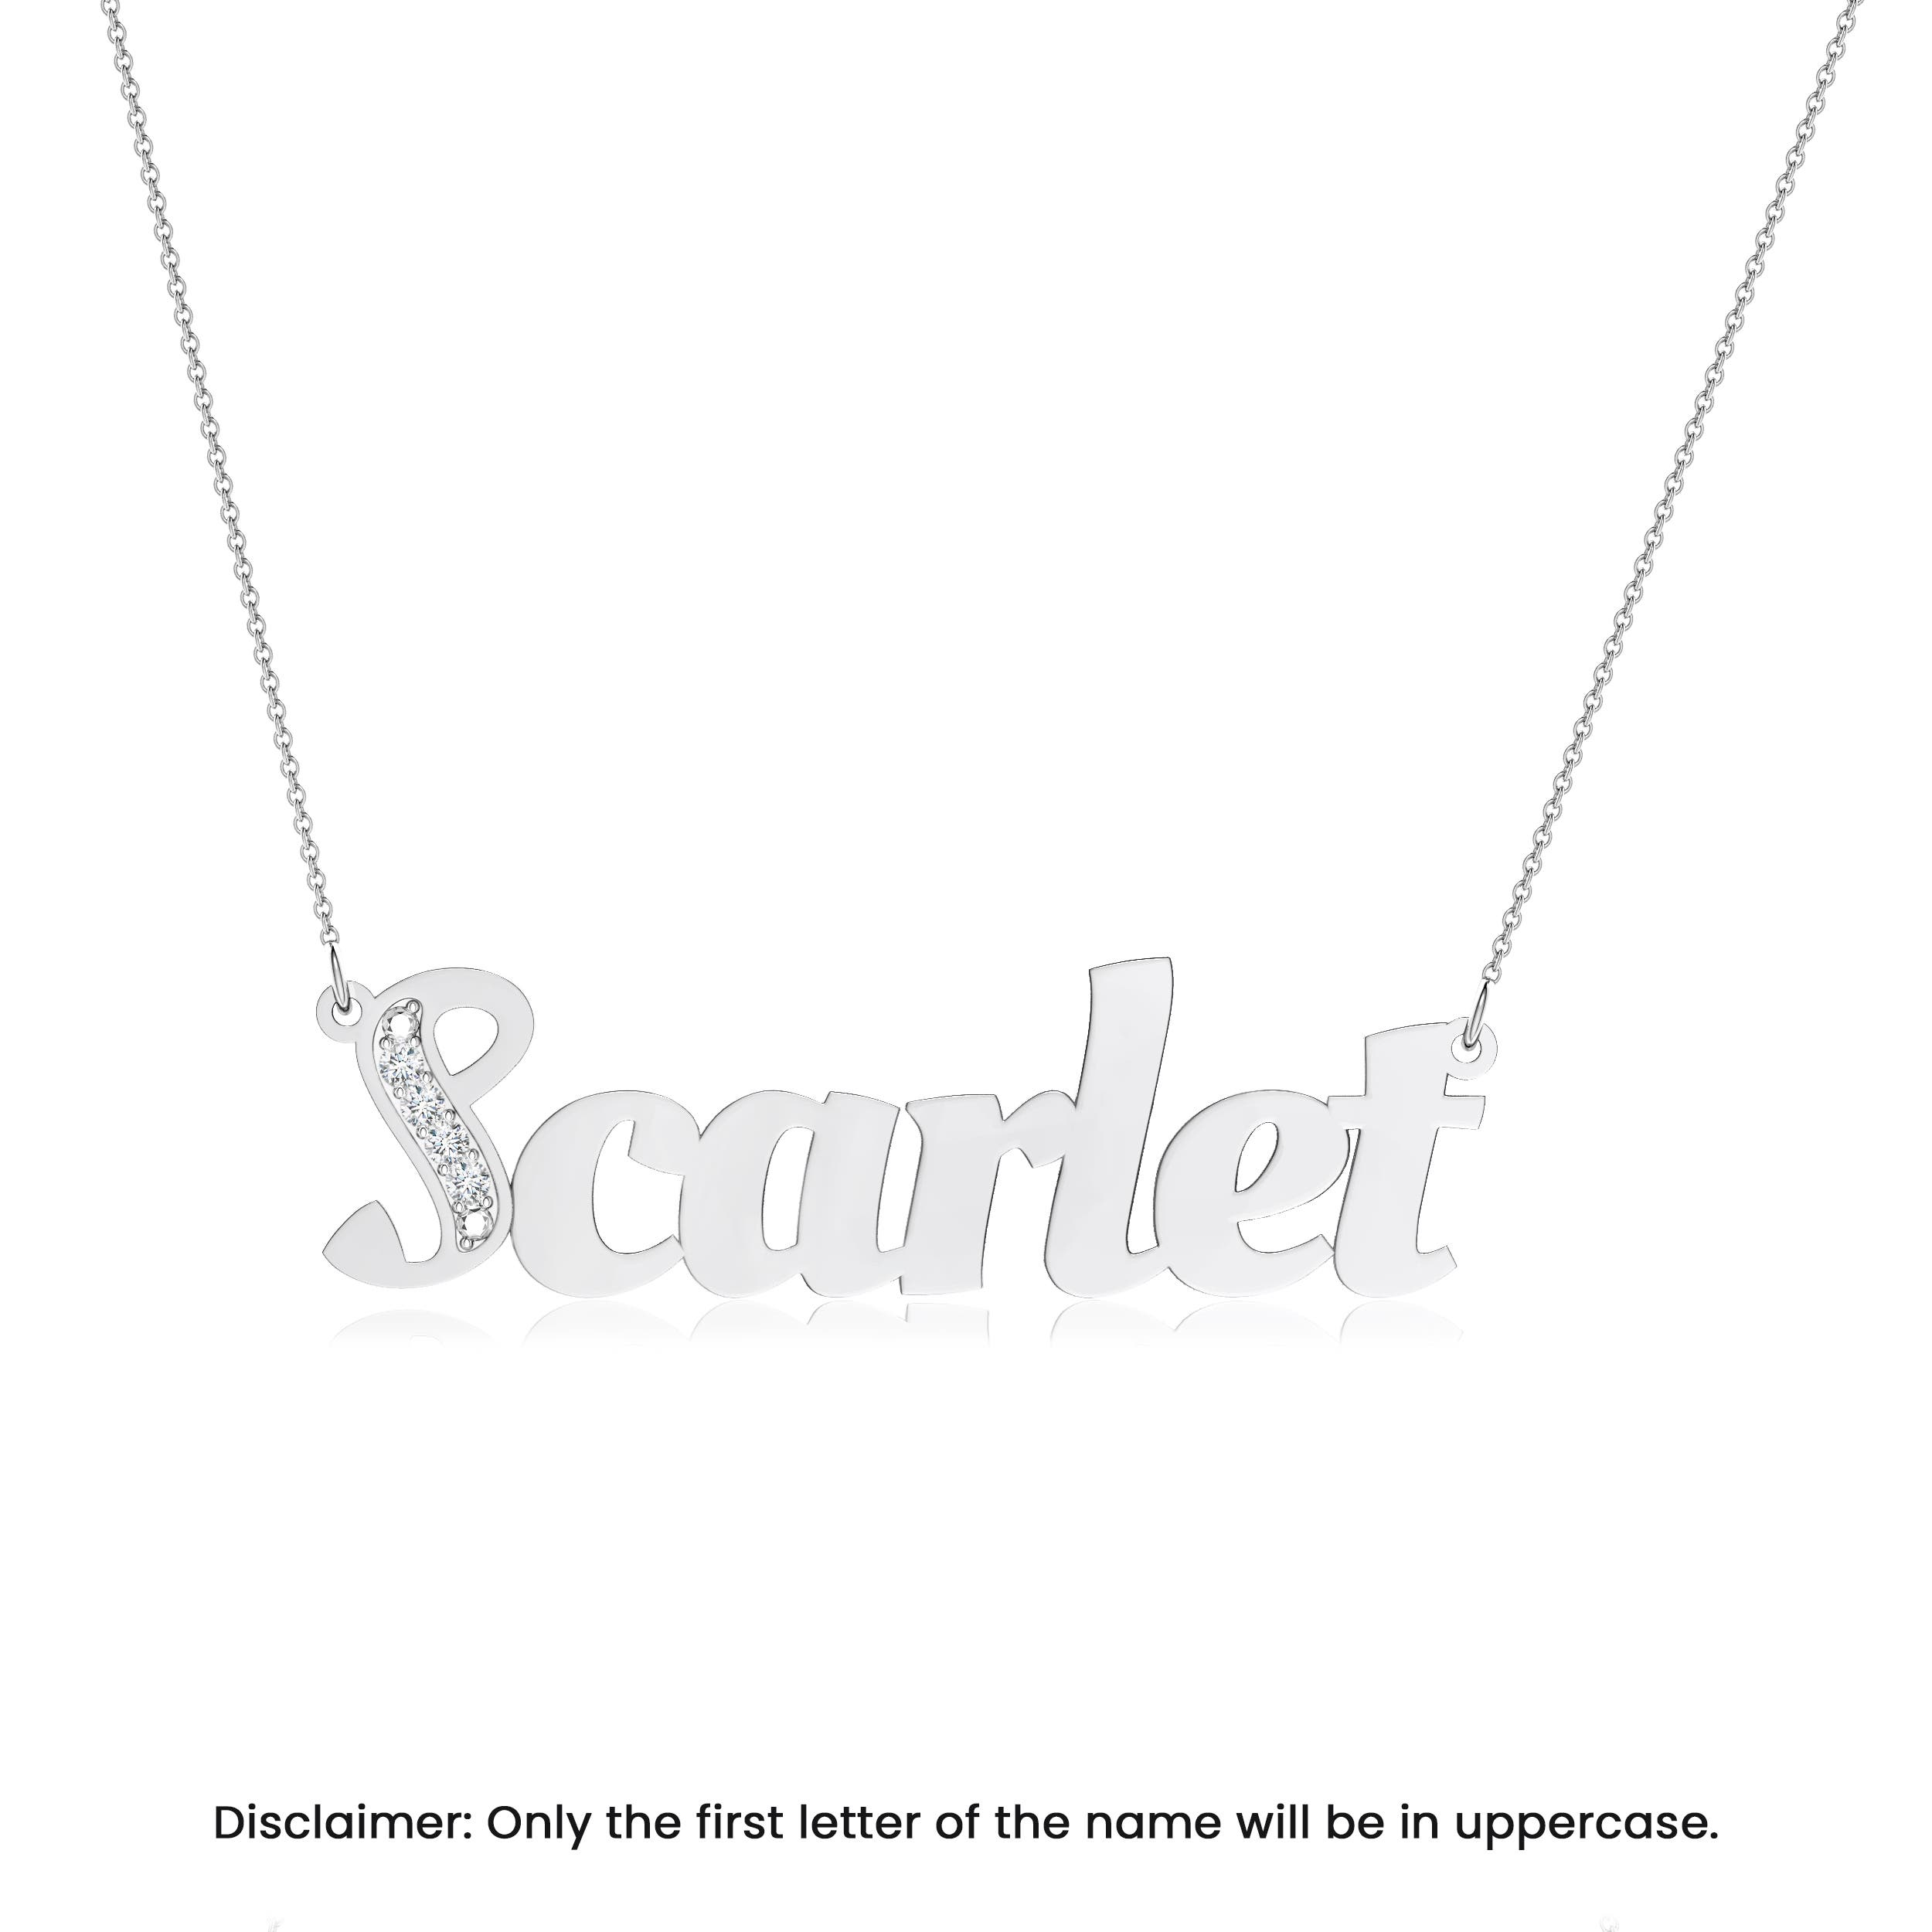 10k White Gold Name Necklace